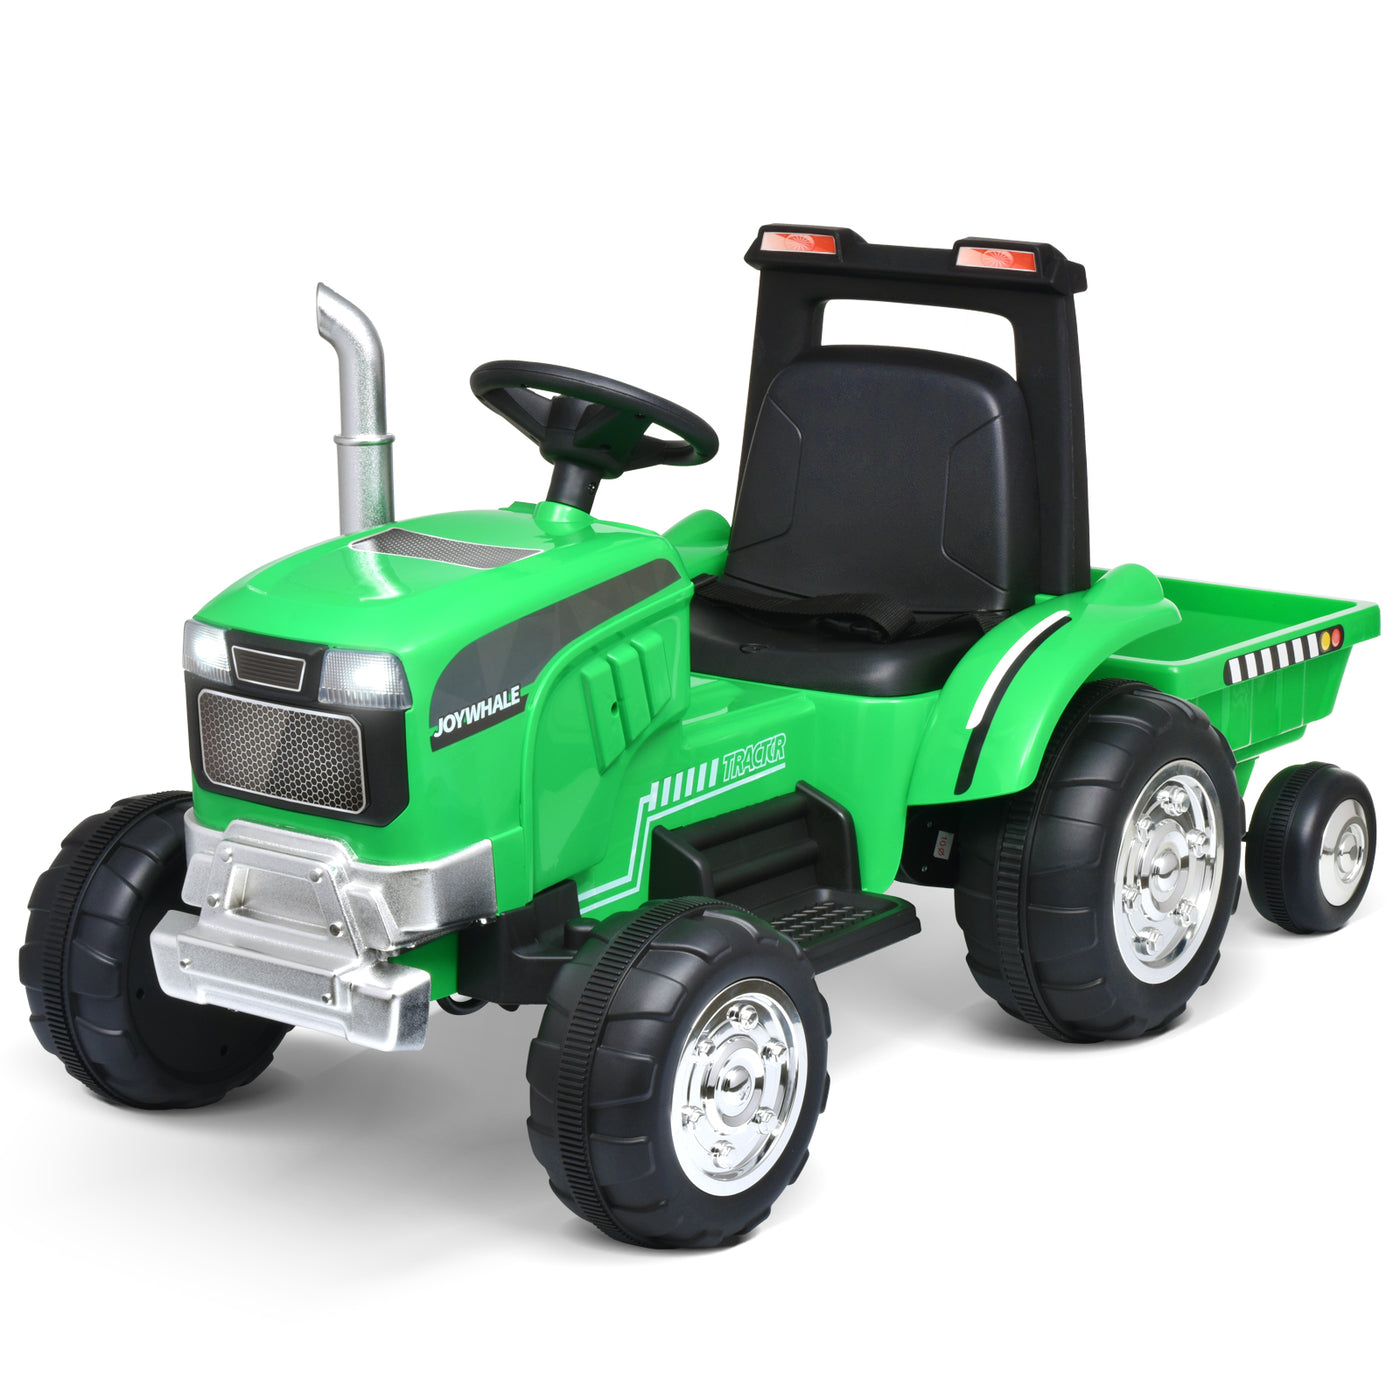 Joywhale 12V Kids Ride on Tractor with Trailer Battery Powered Electric Car for Kids Ages 3-6, with Detachable Trailer, Remote Control & Exhaust Pipe, DP-TR10